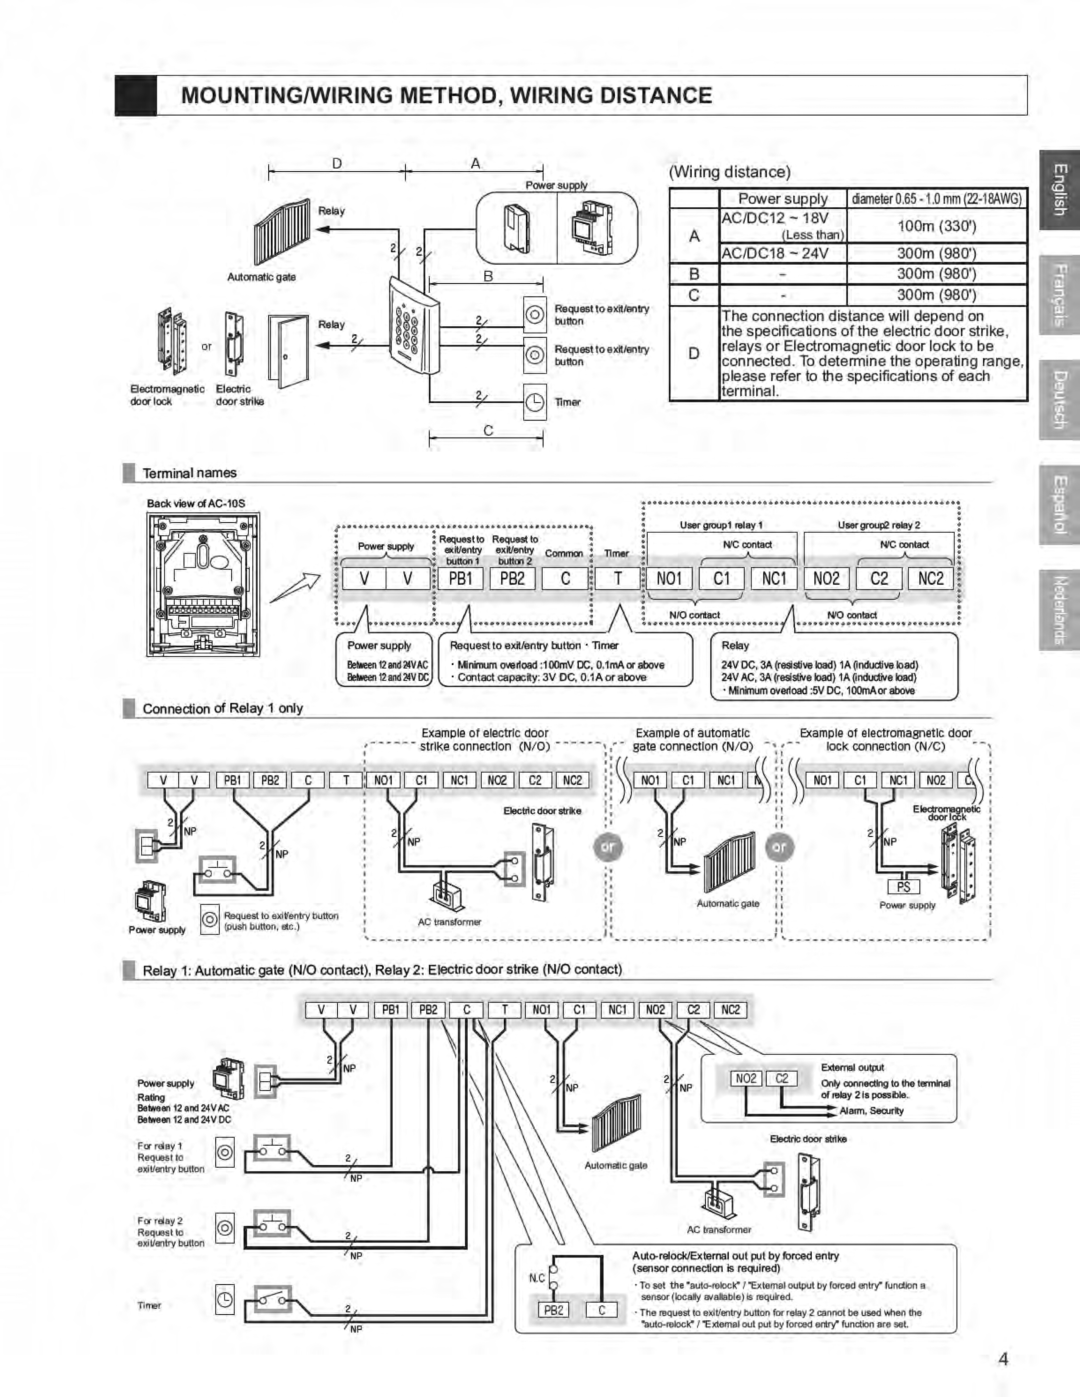 Aiphone AC-10S operation manual 